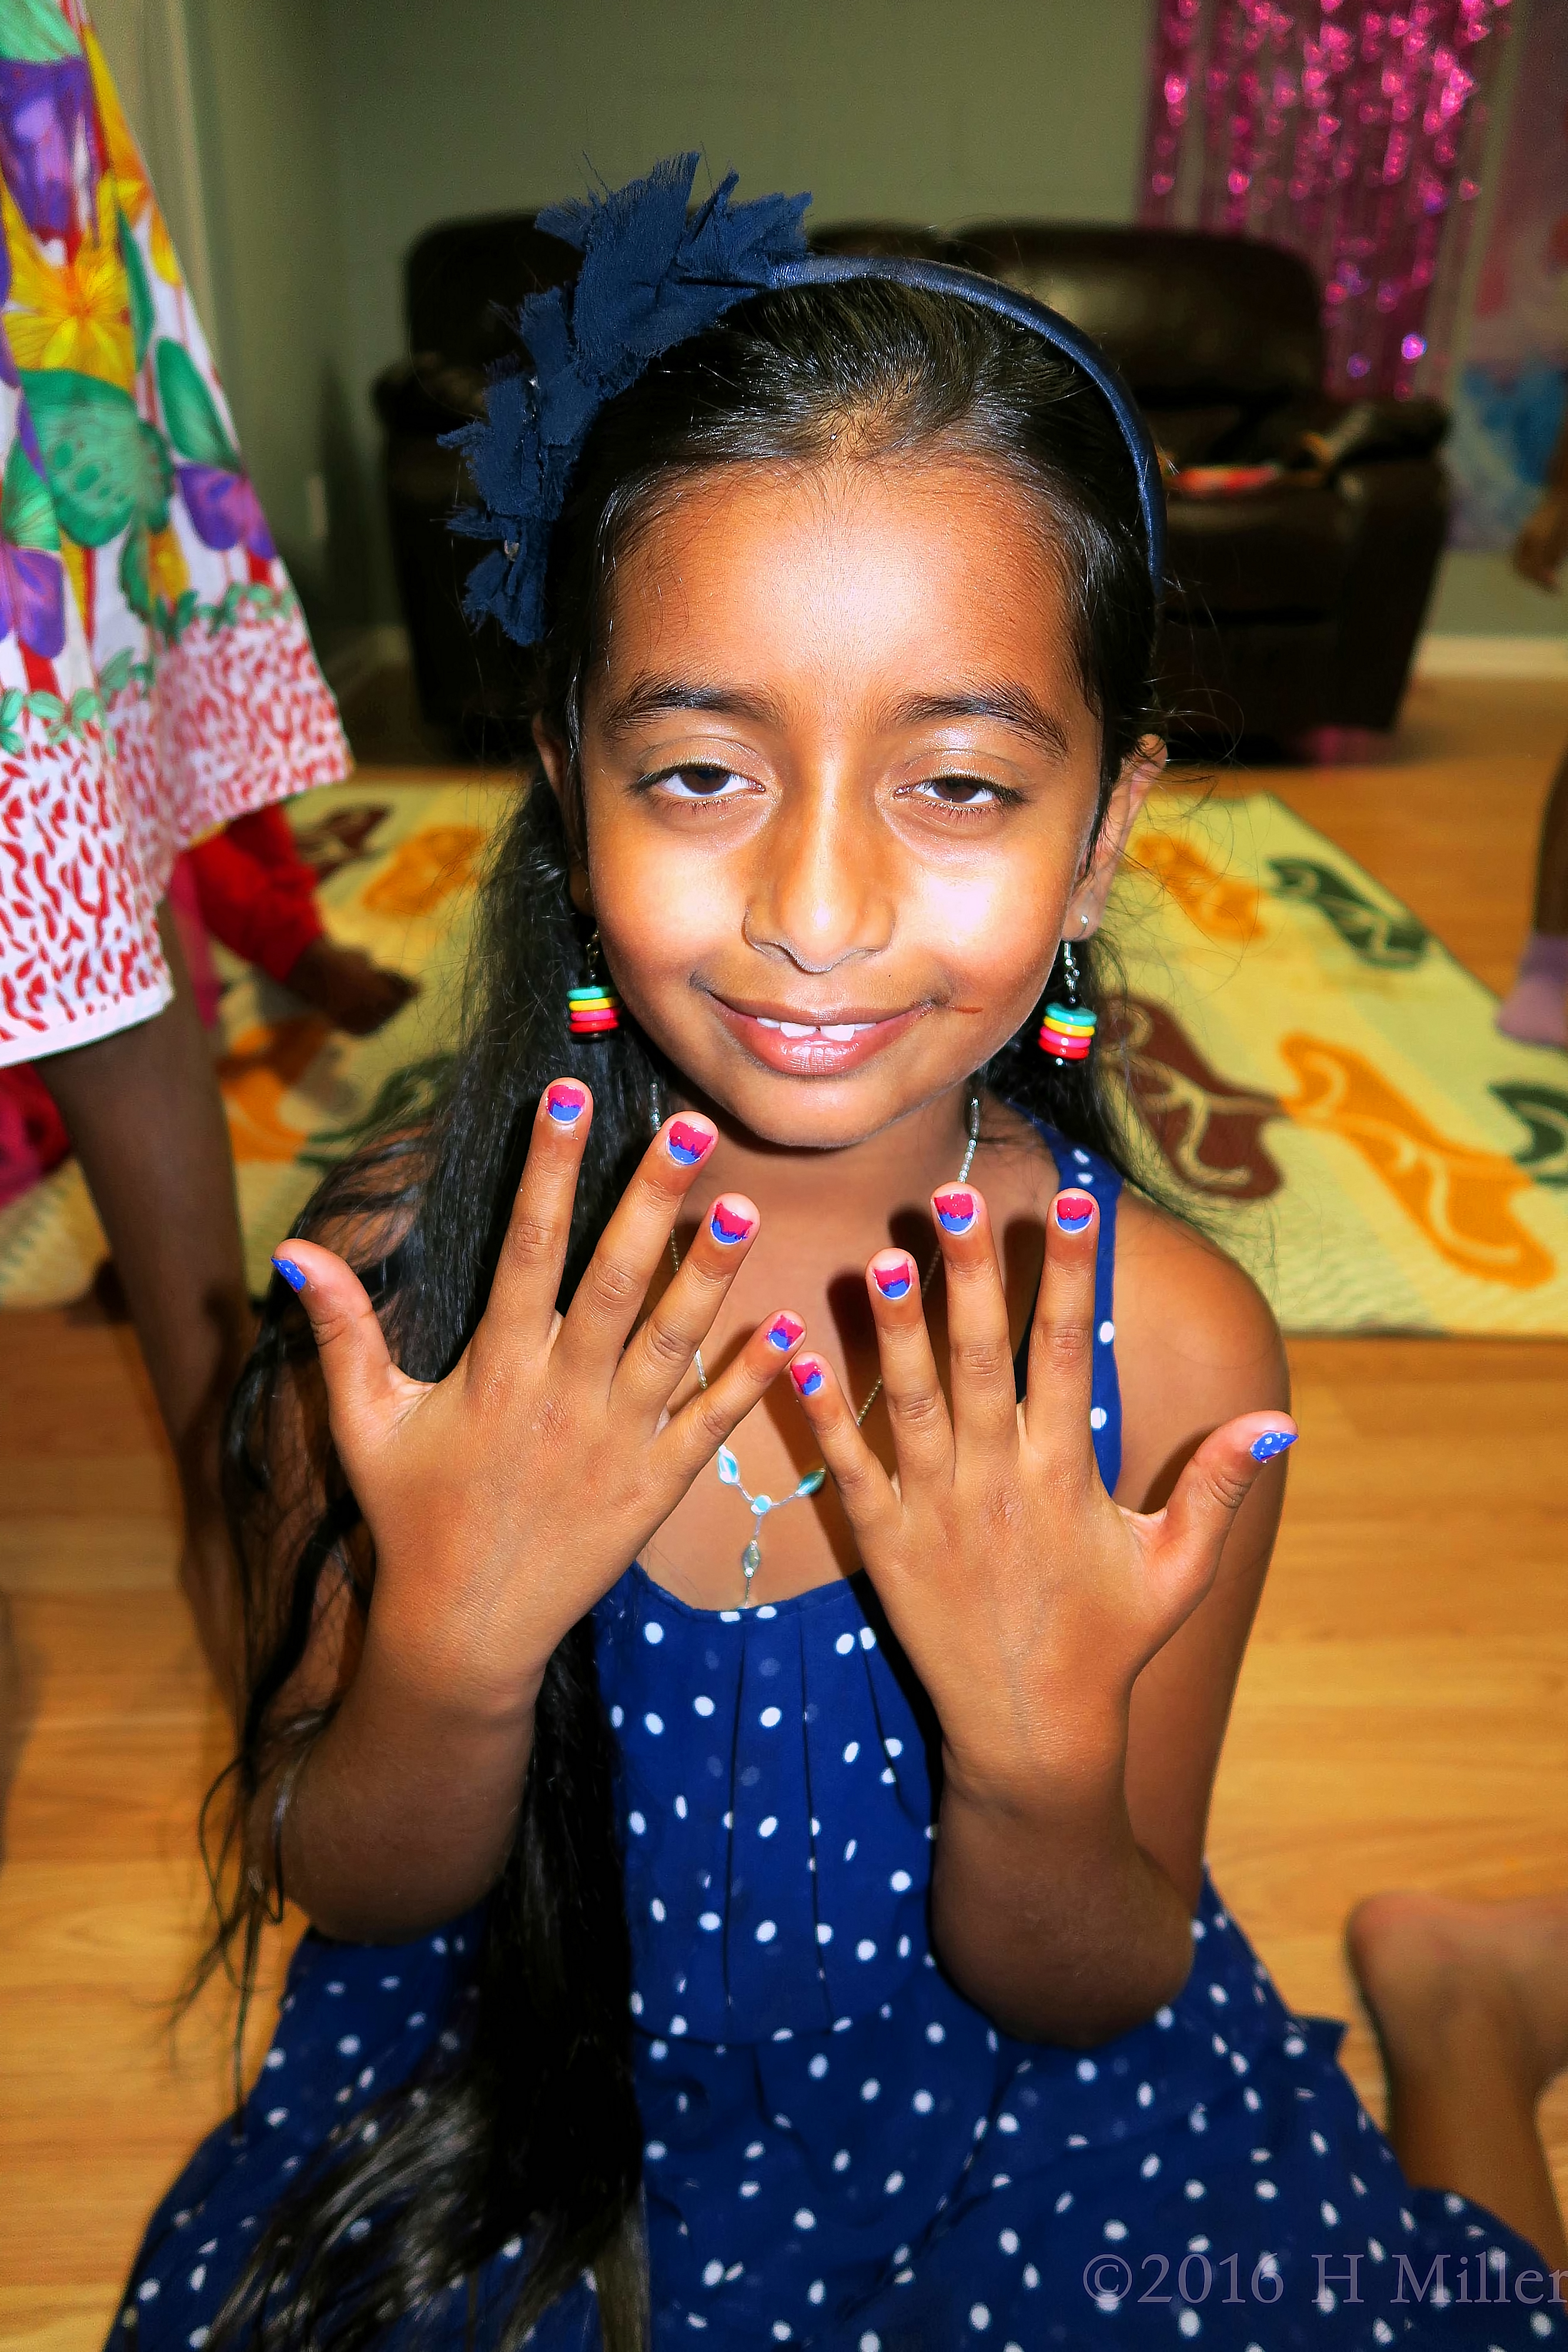 She Loves Her Home Girls Spa Mini Manicure! Ombre Is Super Cool!